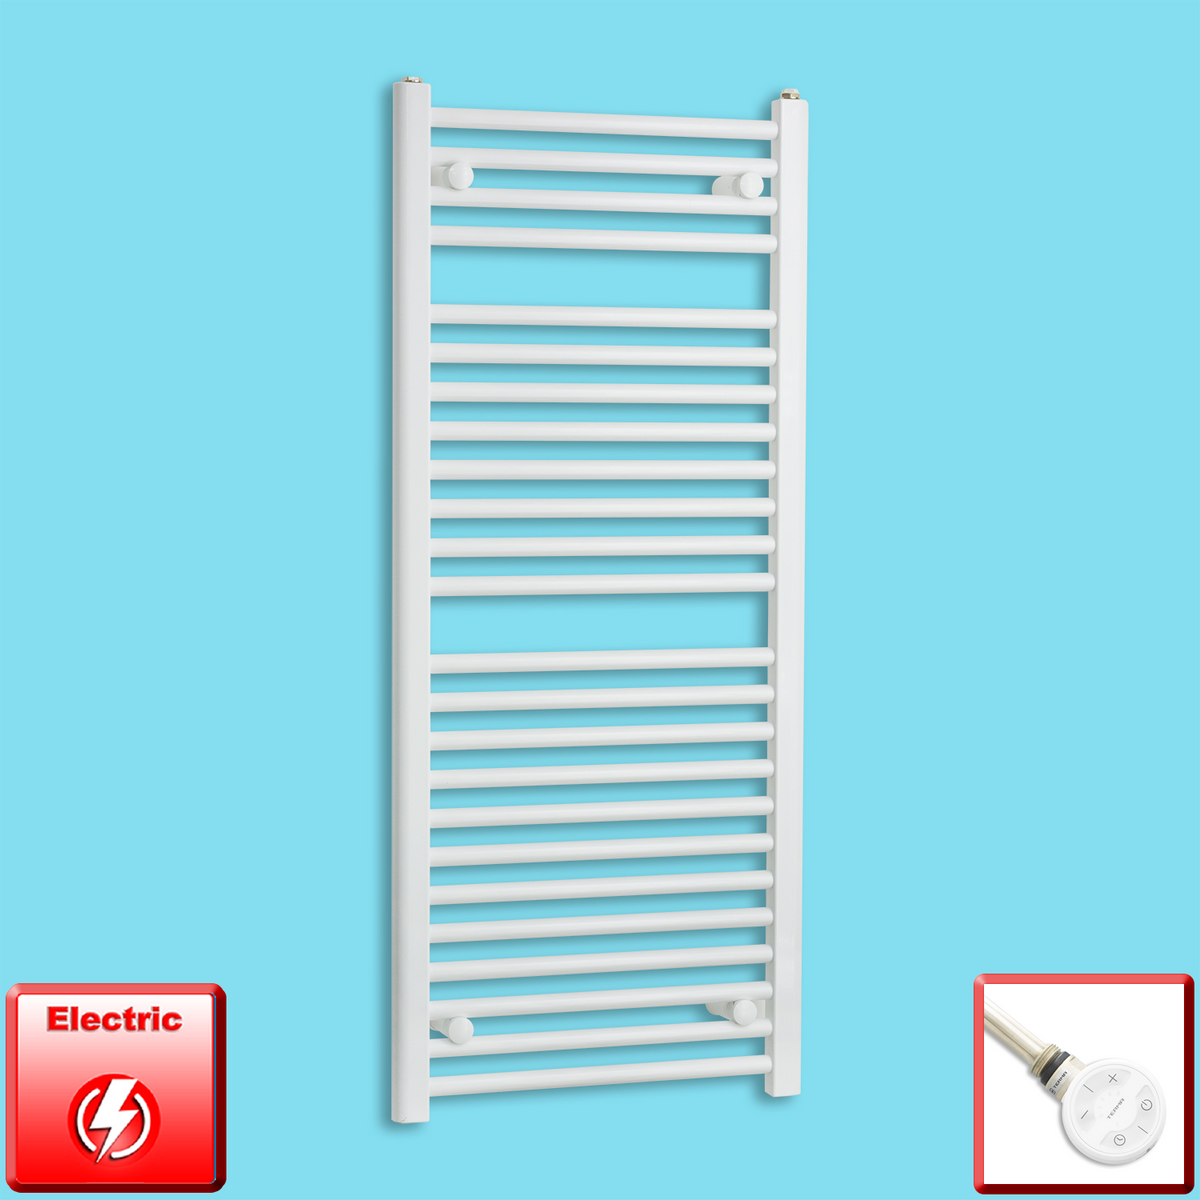 400mm Wide 1200mm High Pre-Filled White Electric Towel Rail Radiator With Thermostatic MOA Element